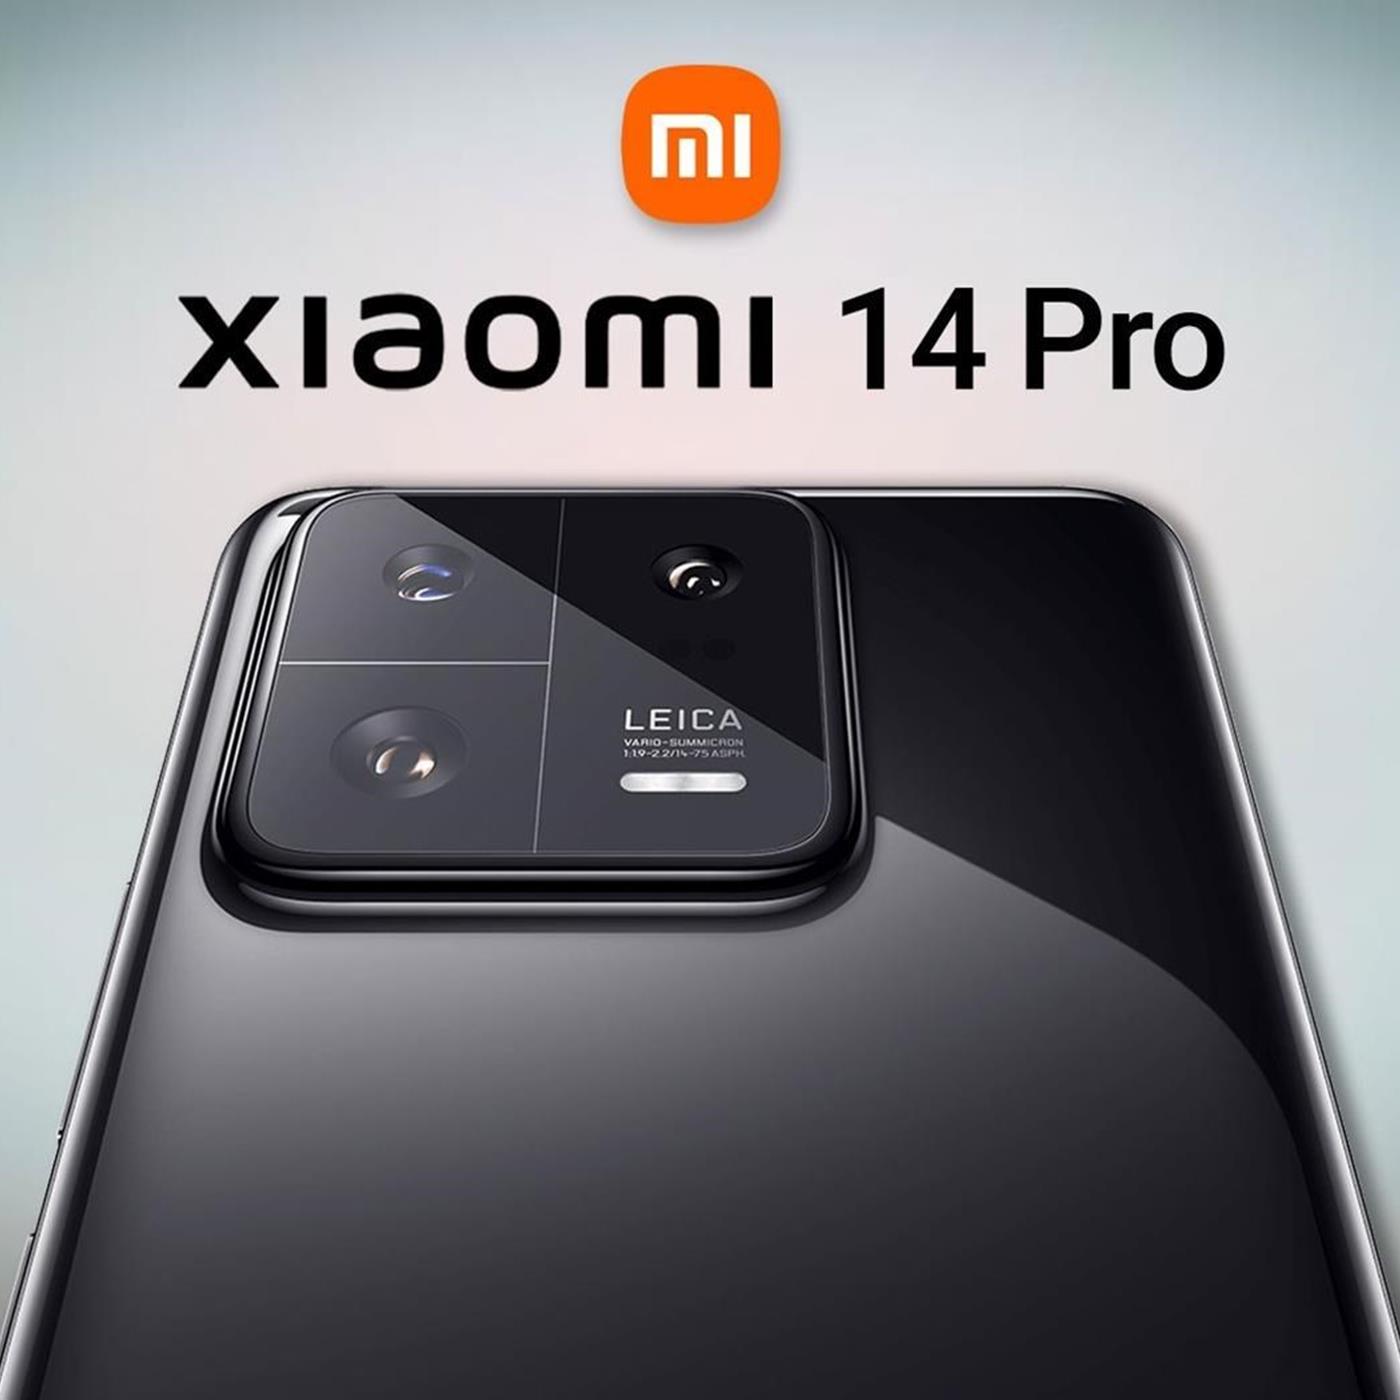 Xiaomi 14 Pro: Leaked Images and Specs